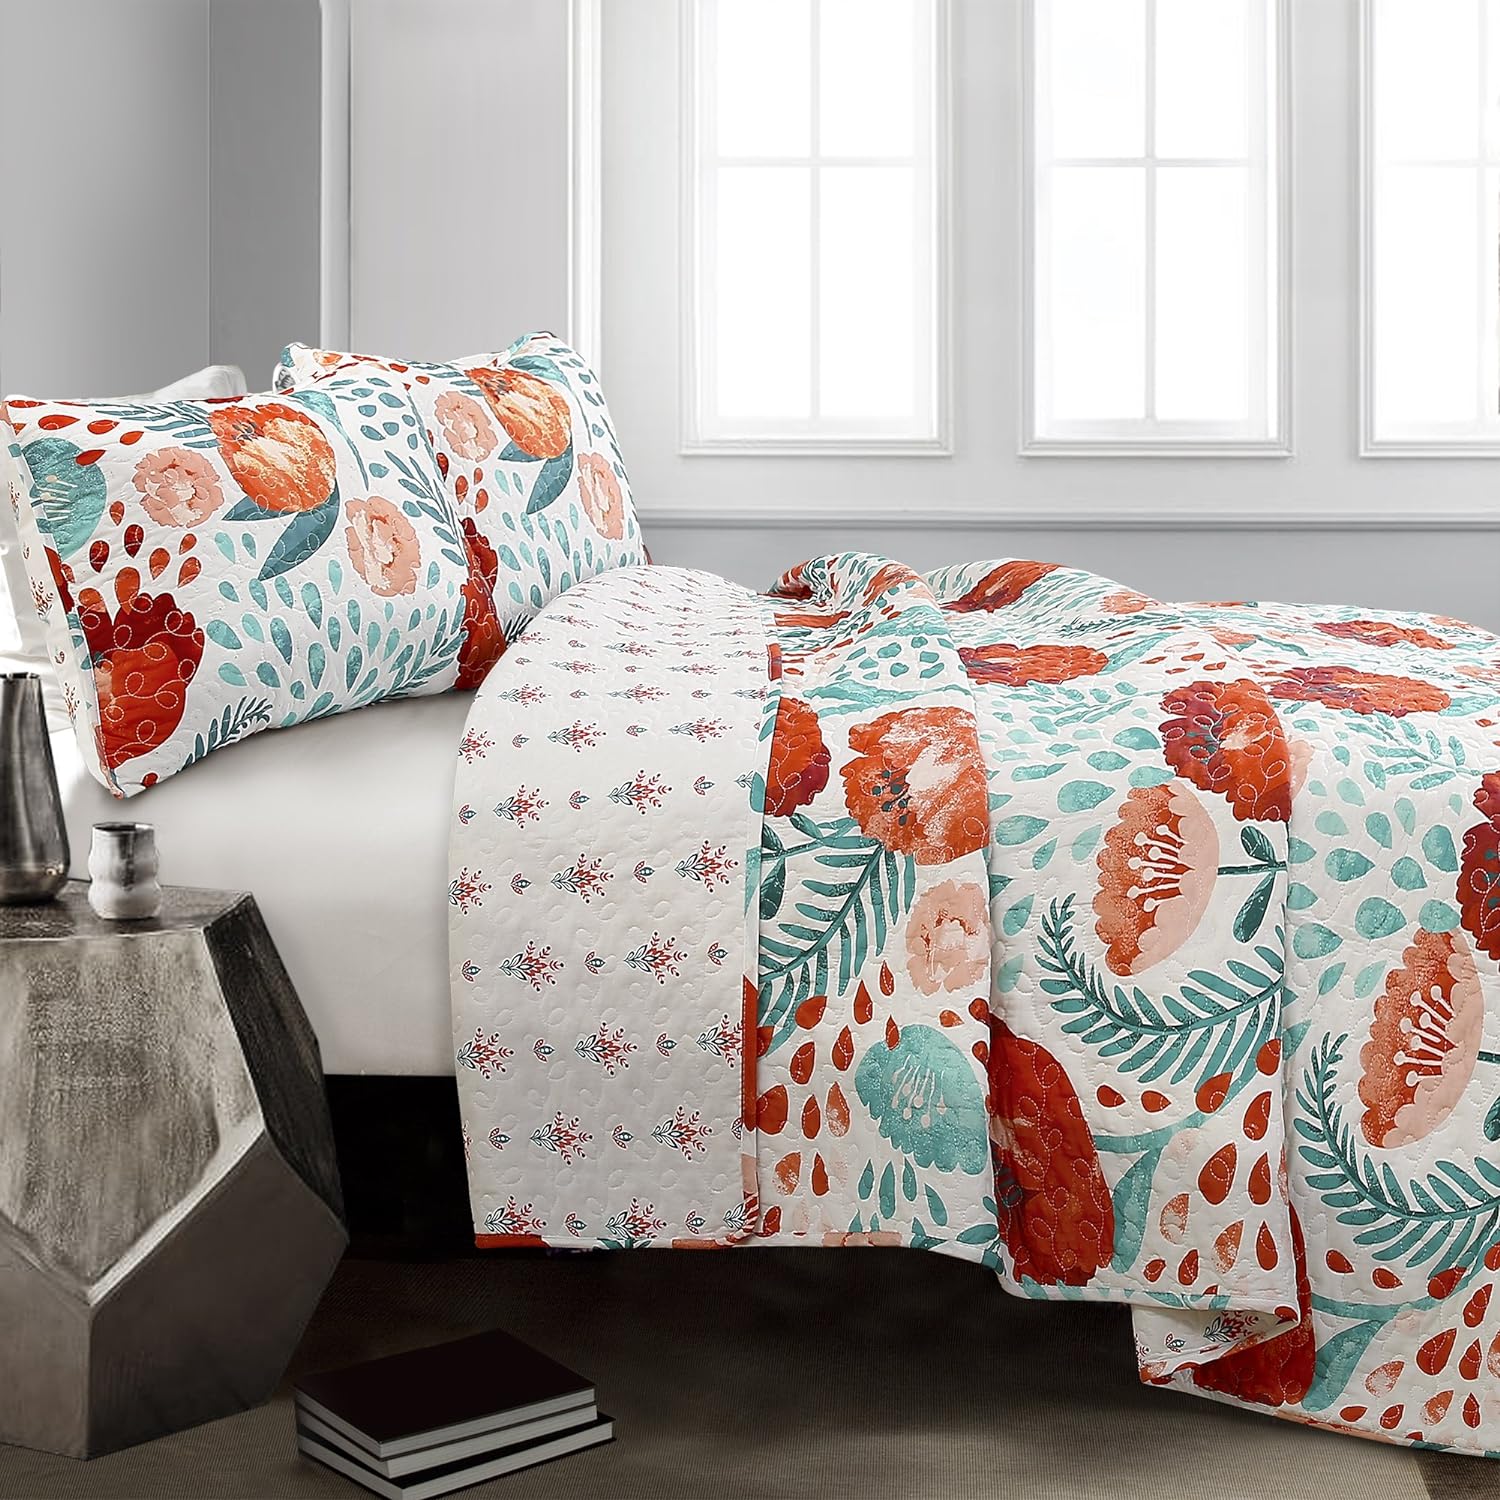 GCP Products Poppy Garden 3 Piece Quilt Set, Full/ Queen, Multicolored